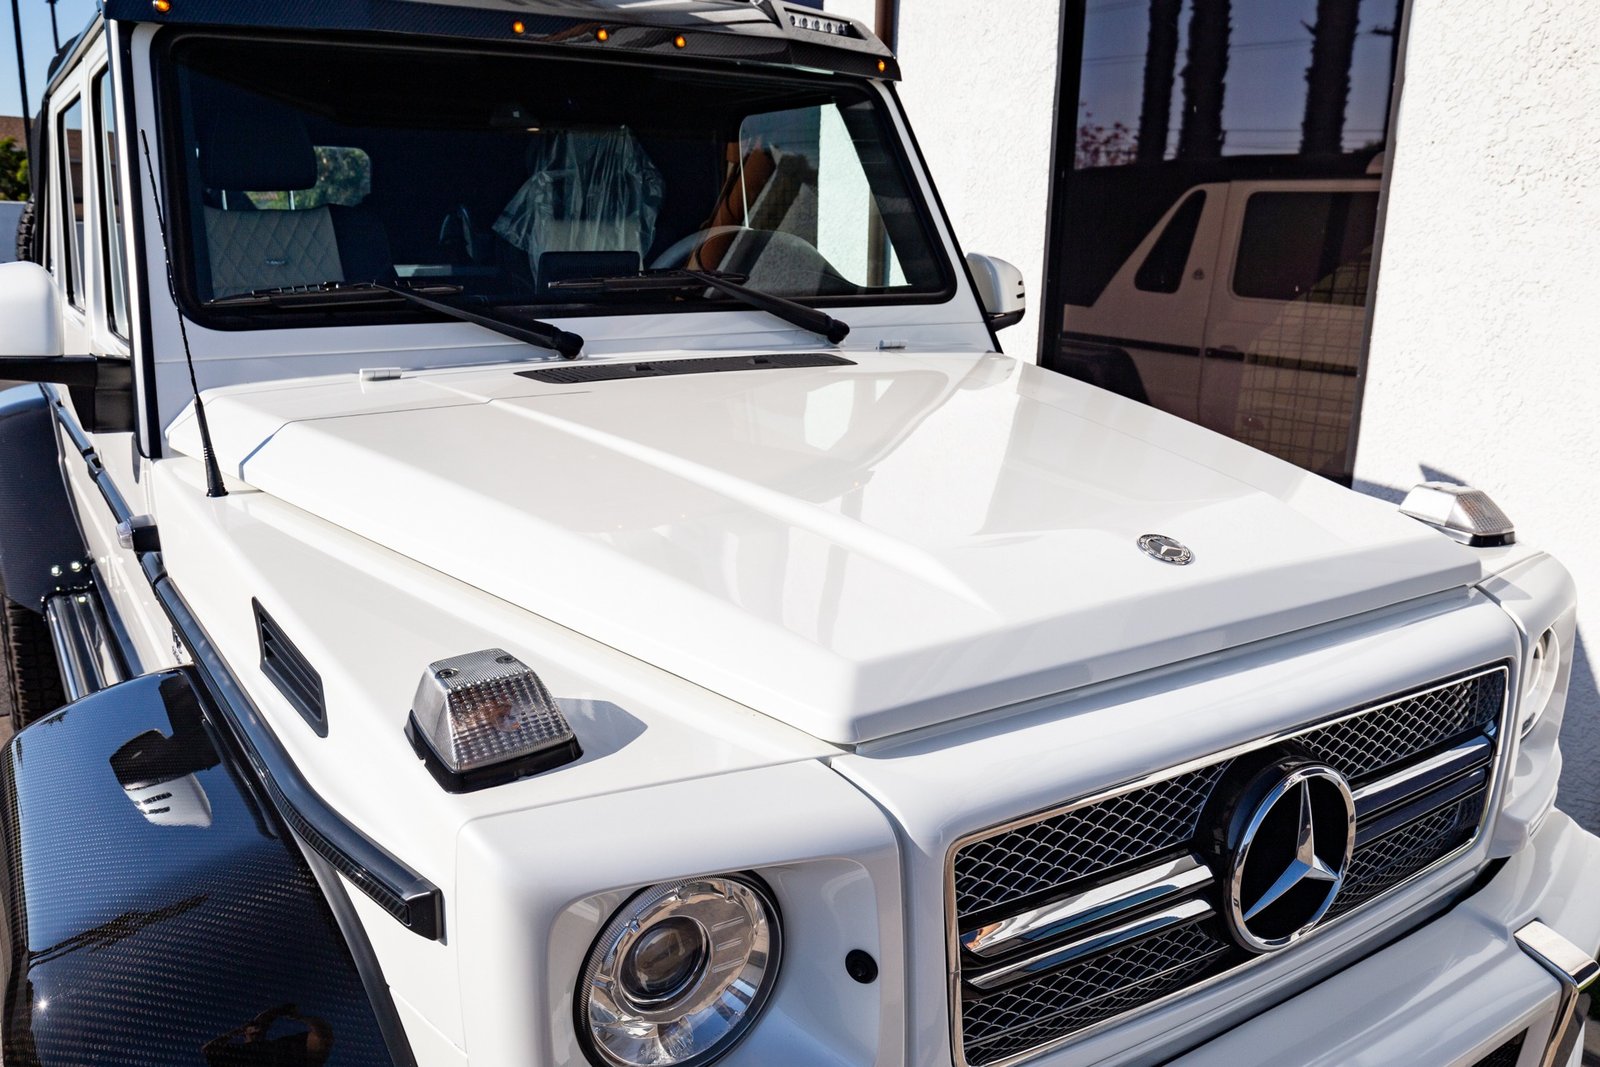 Used 2018 Mercedes-Benz G650 Maybach (33)